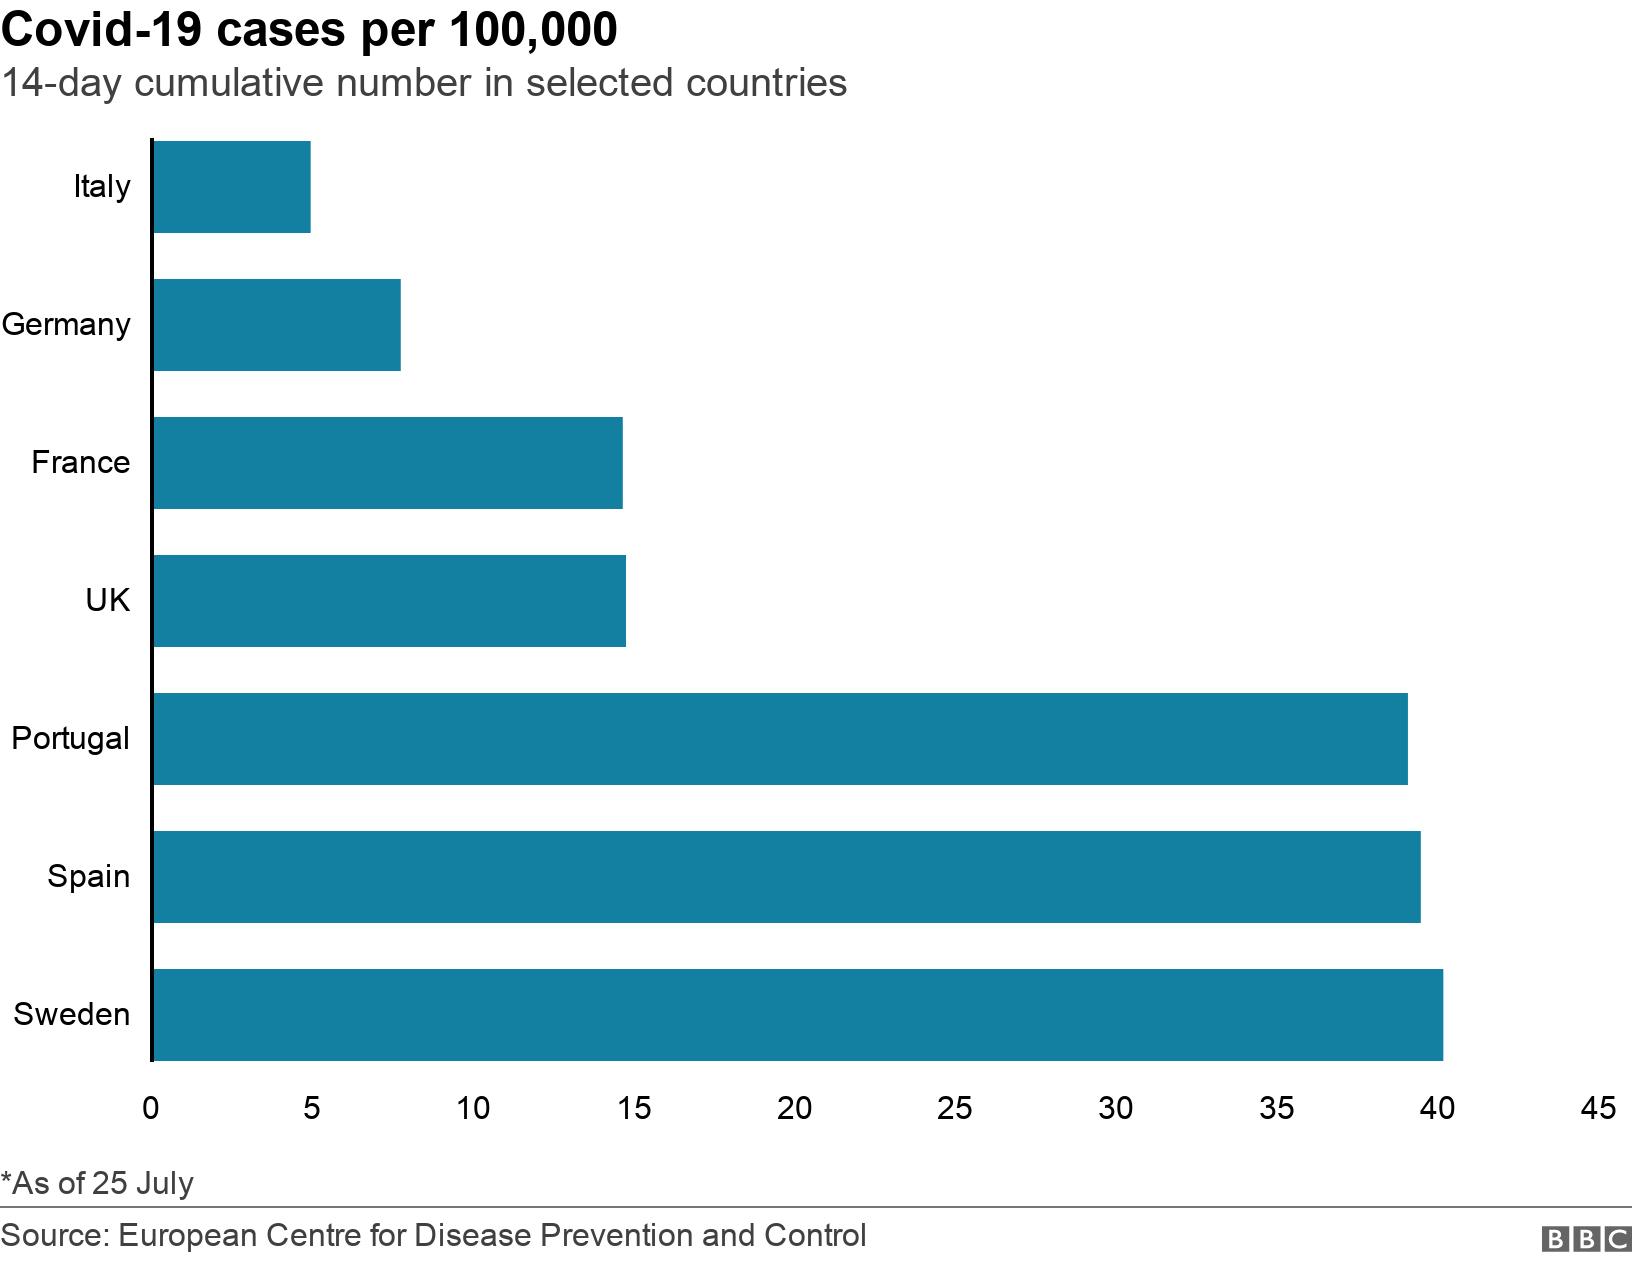 Covid-19 cases per 100,000. 14-day cumulative number in selected countries. Graphic shows 14-day cumulative number of Covid-19 cases per 100,000 *As of 25 July.